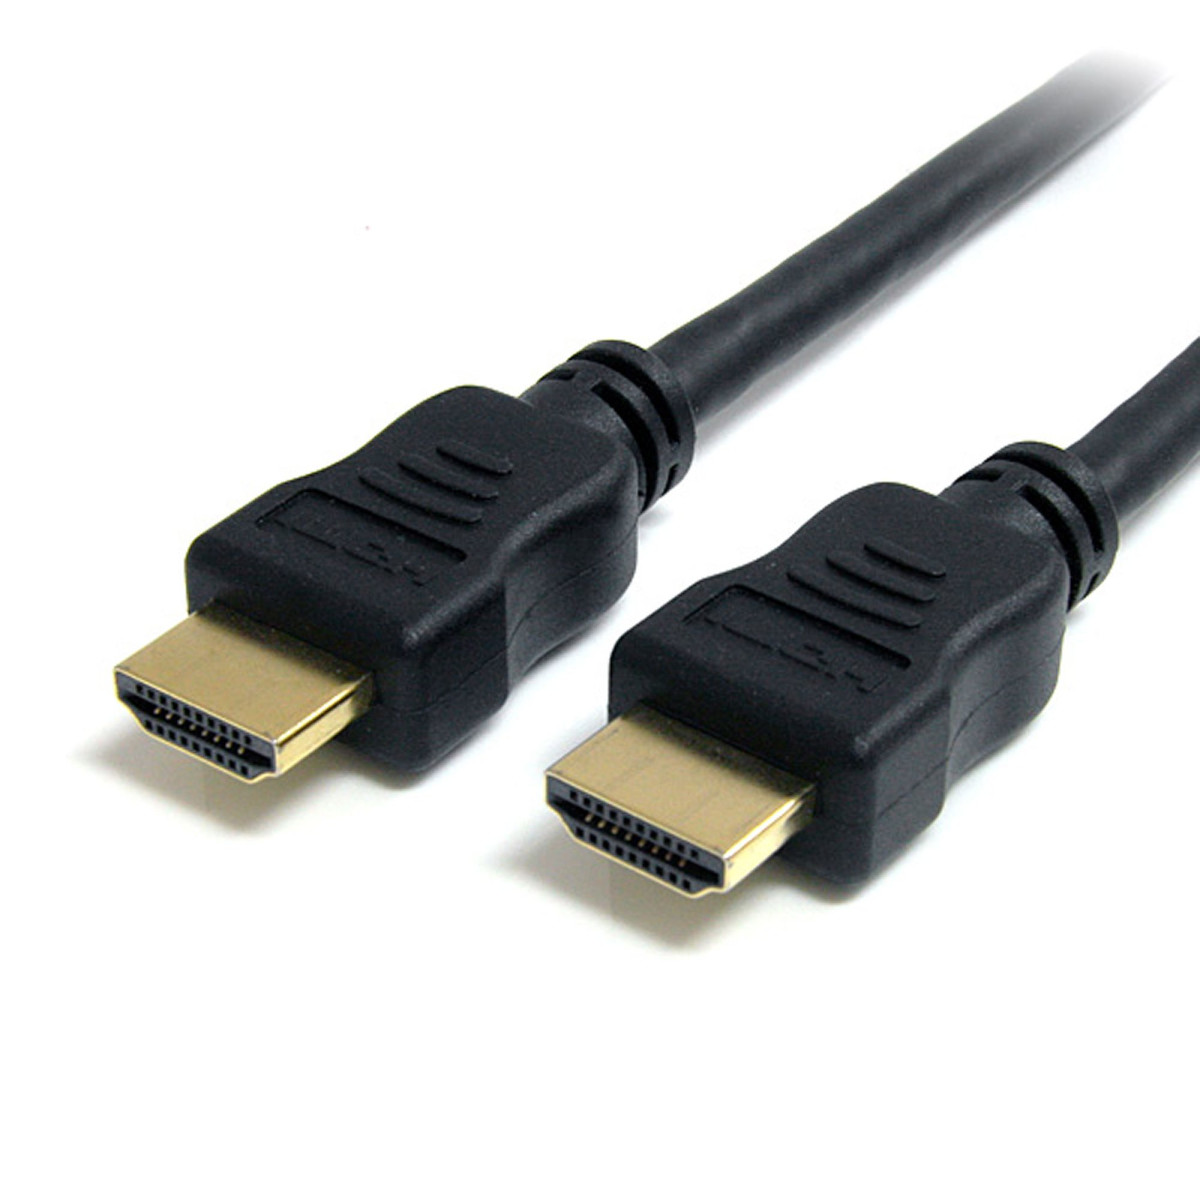 2m High Speed HDMI Cable w/Ethernet